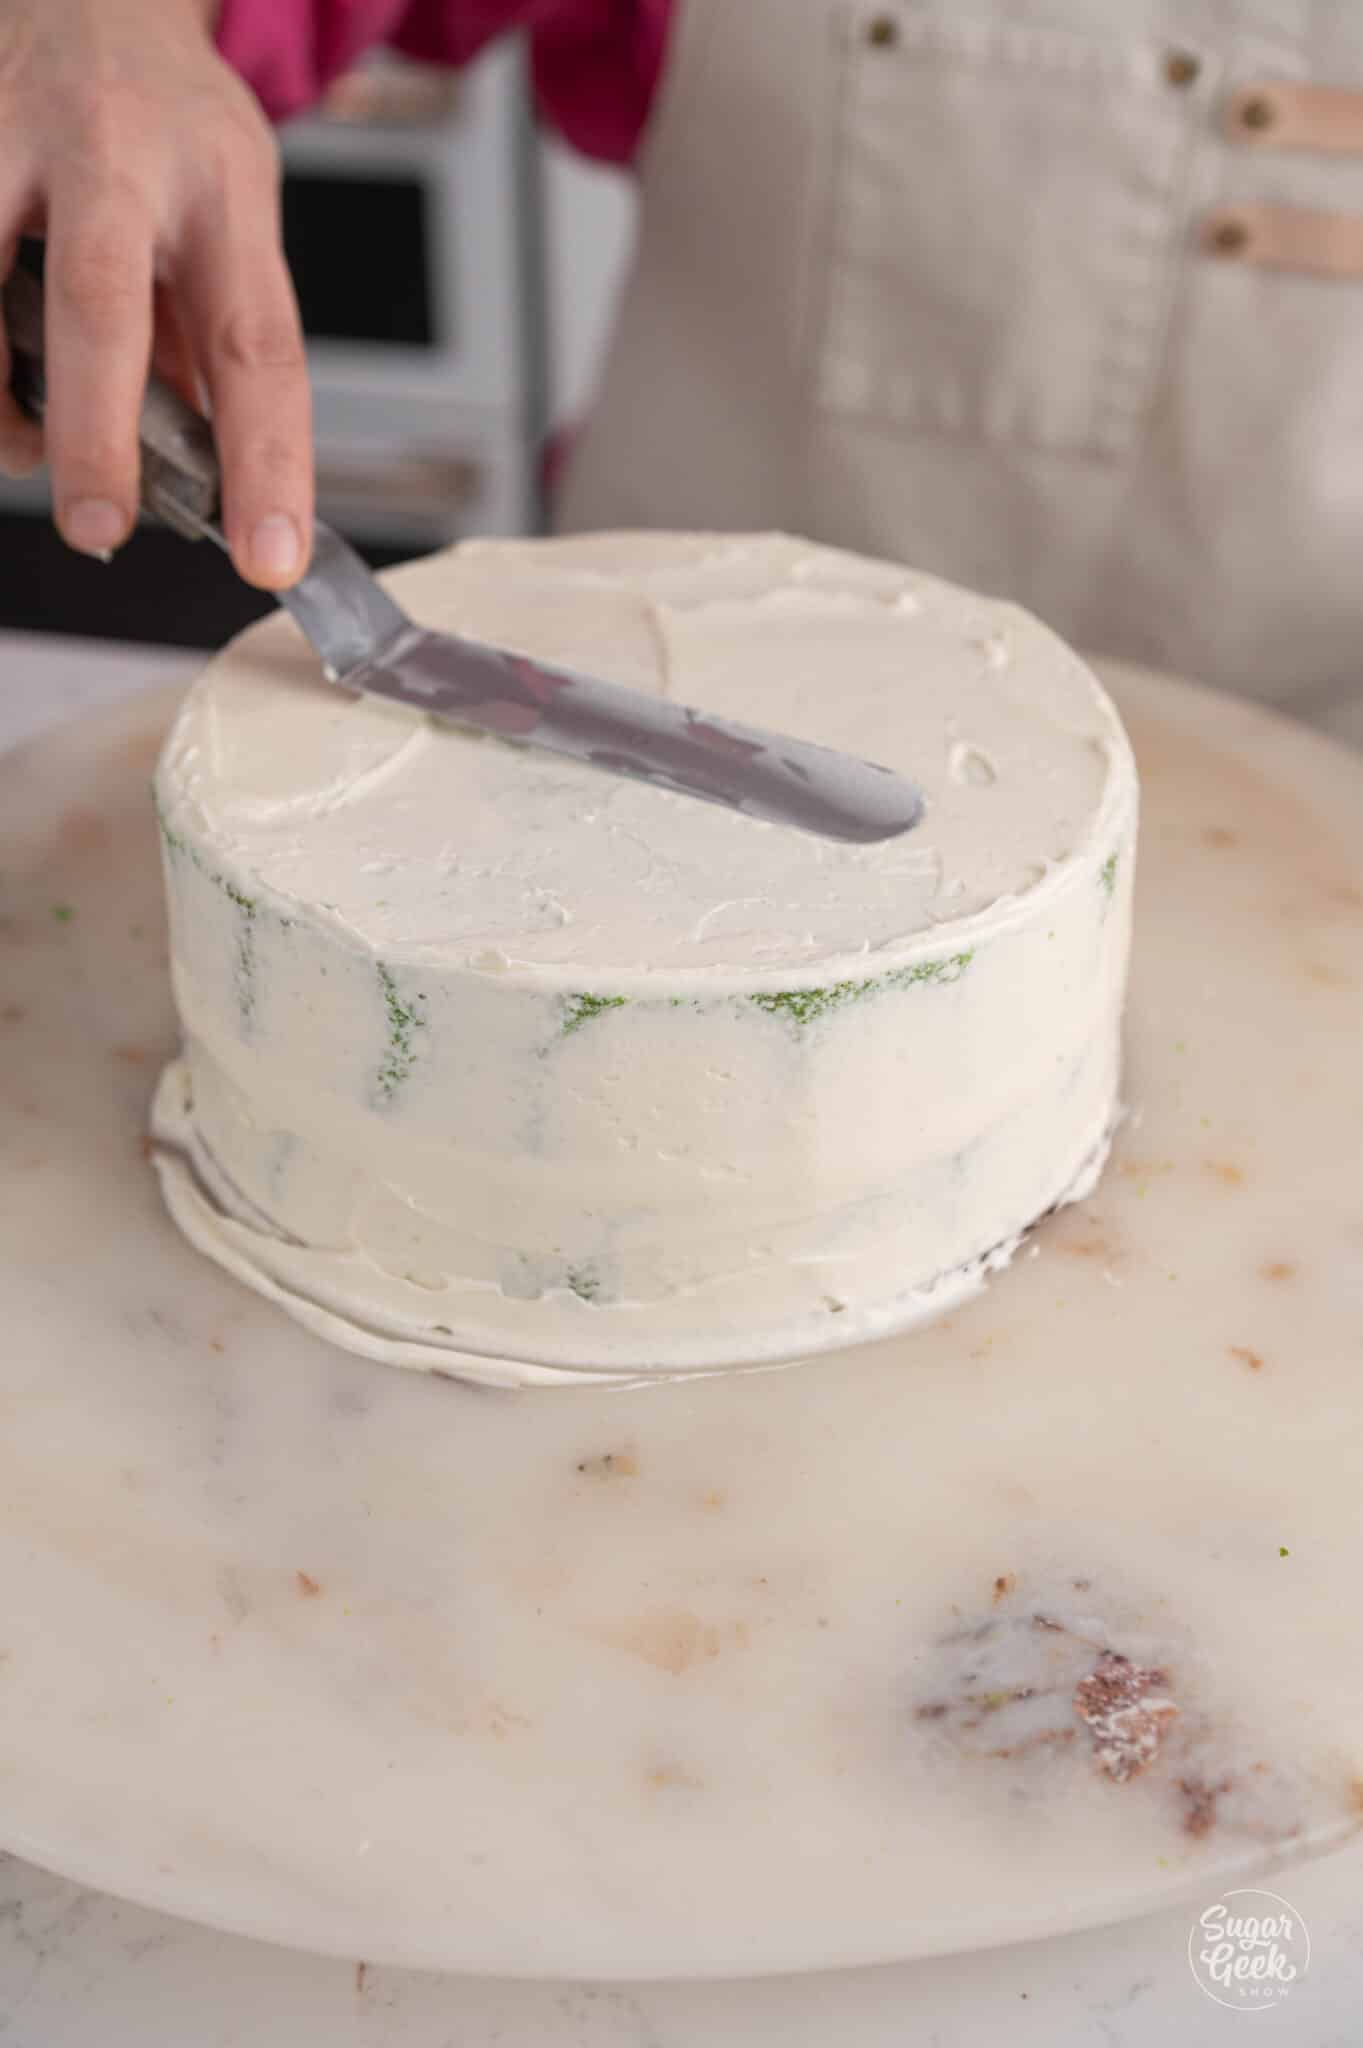 smoothing a crumb coat on a green velvet cake with a spatula